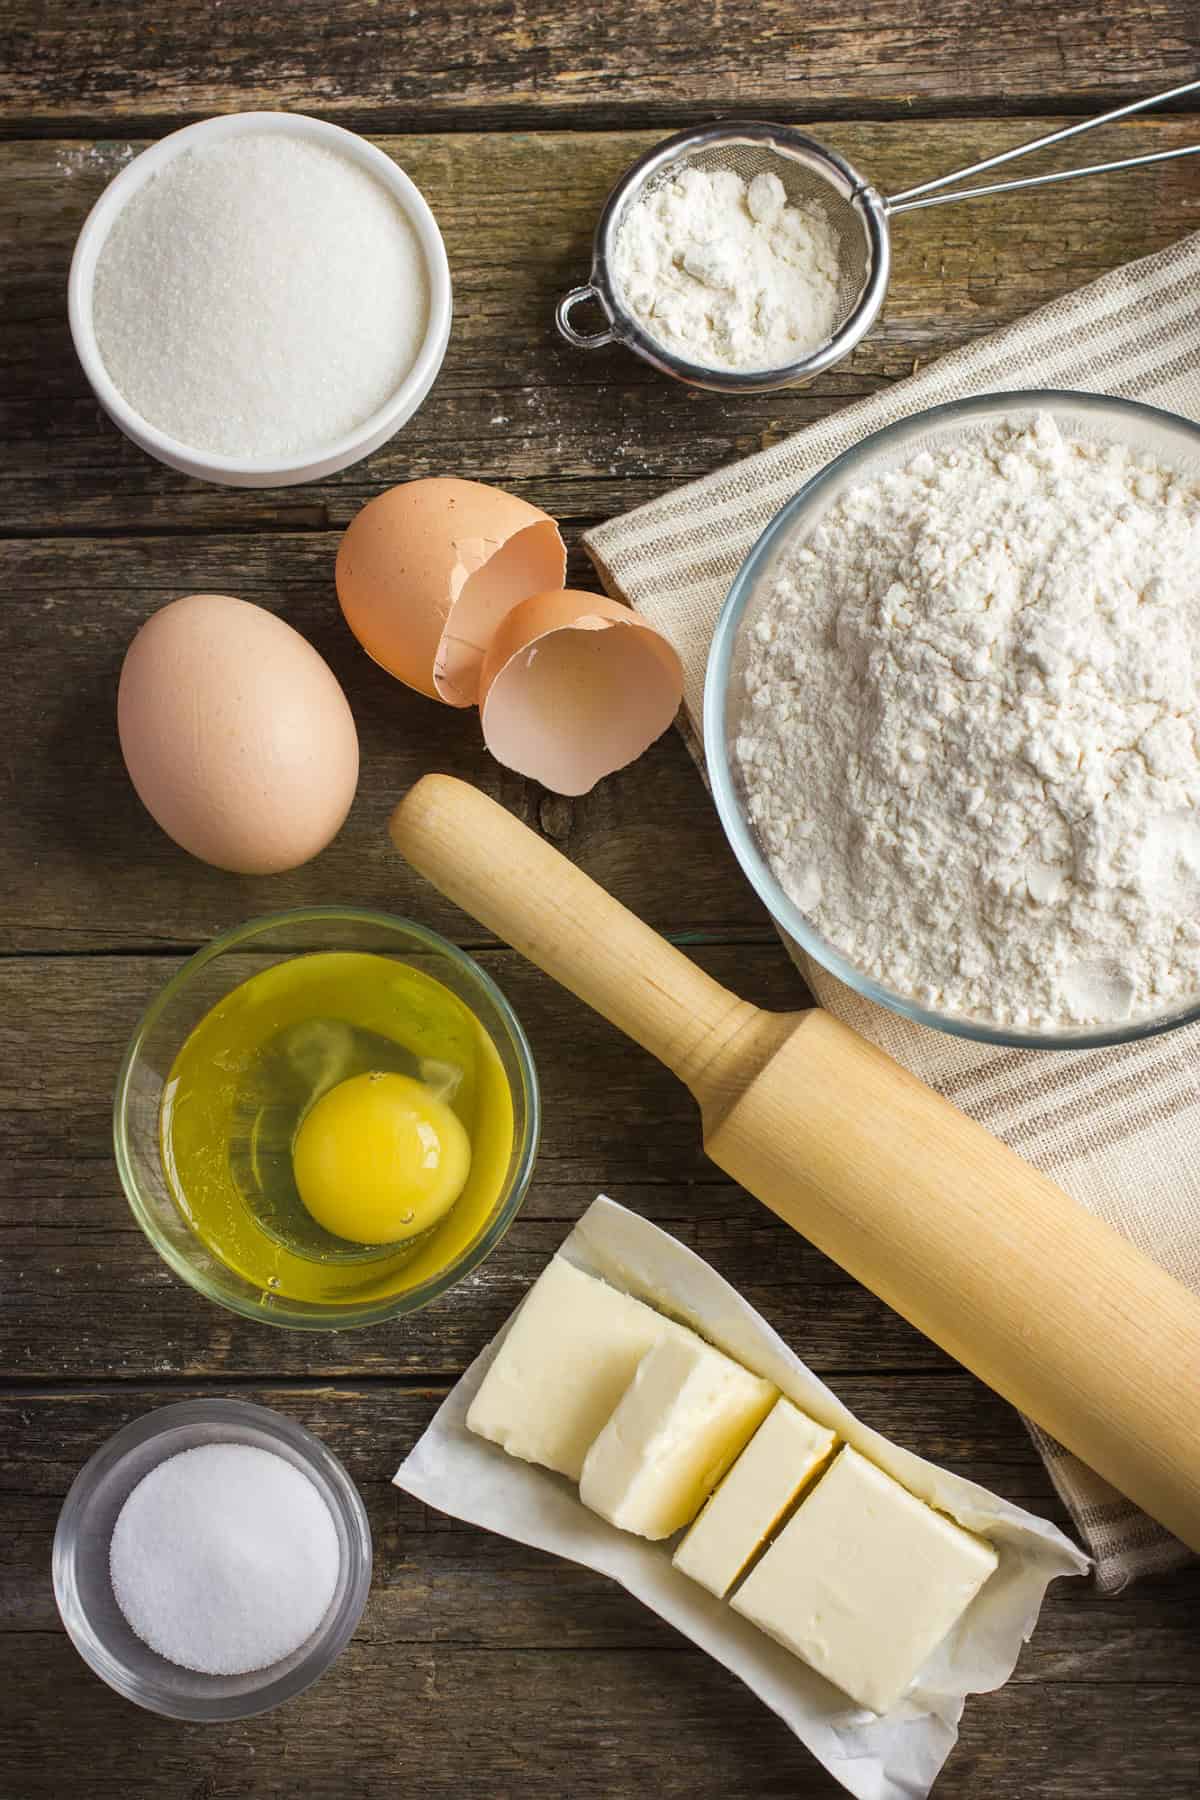 Baking ingredients on a wooden table.